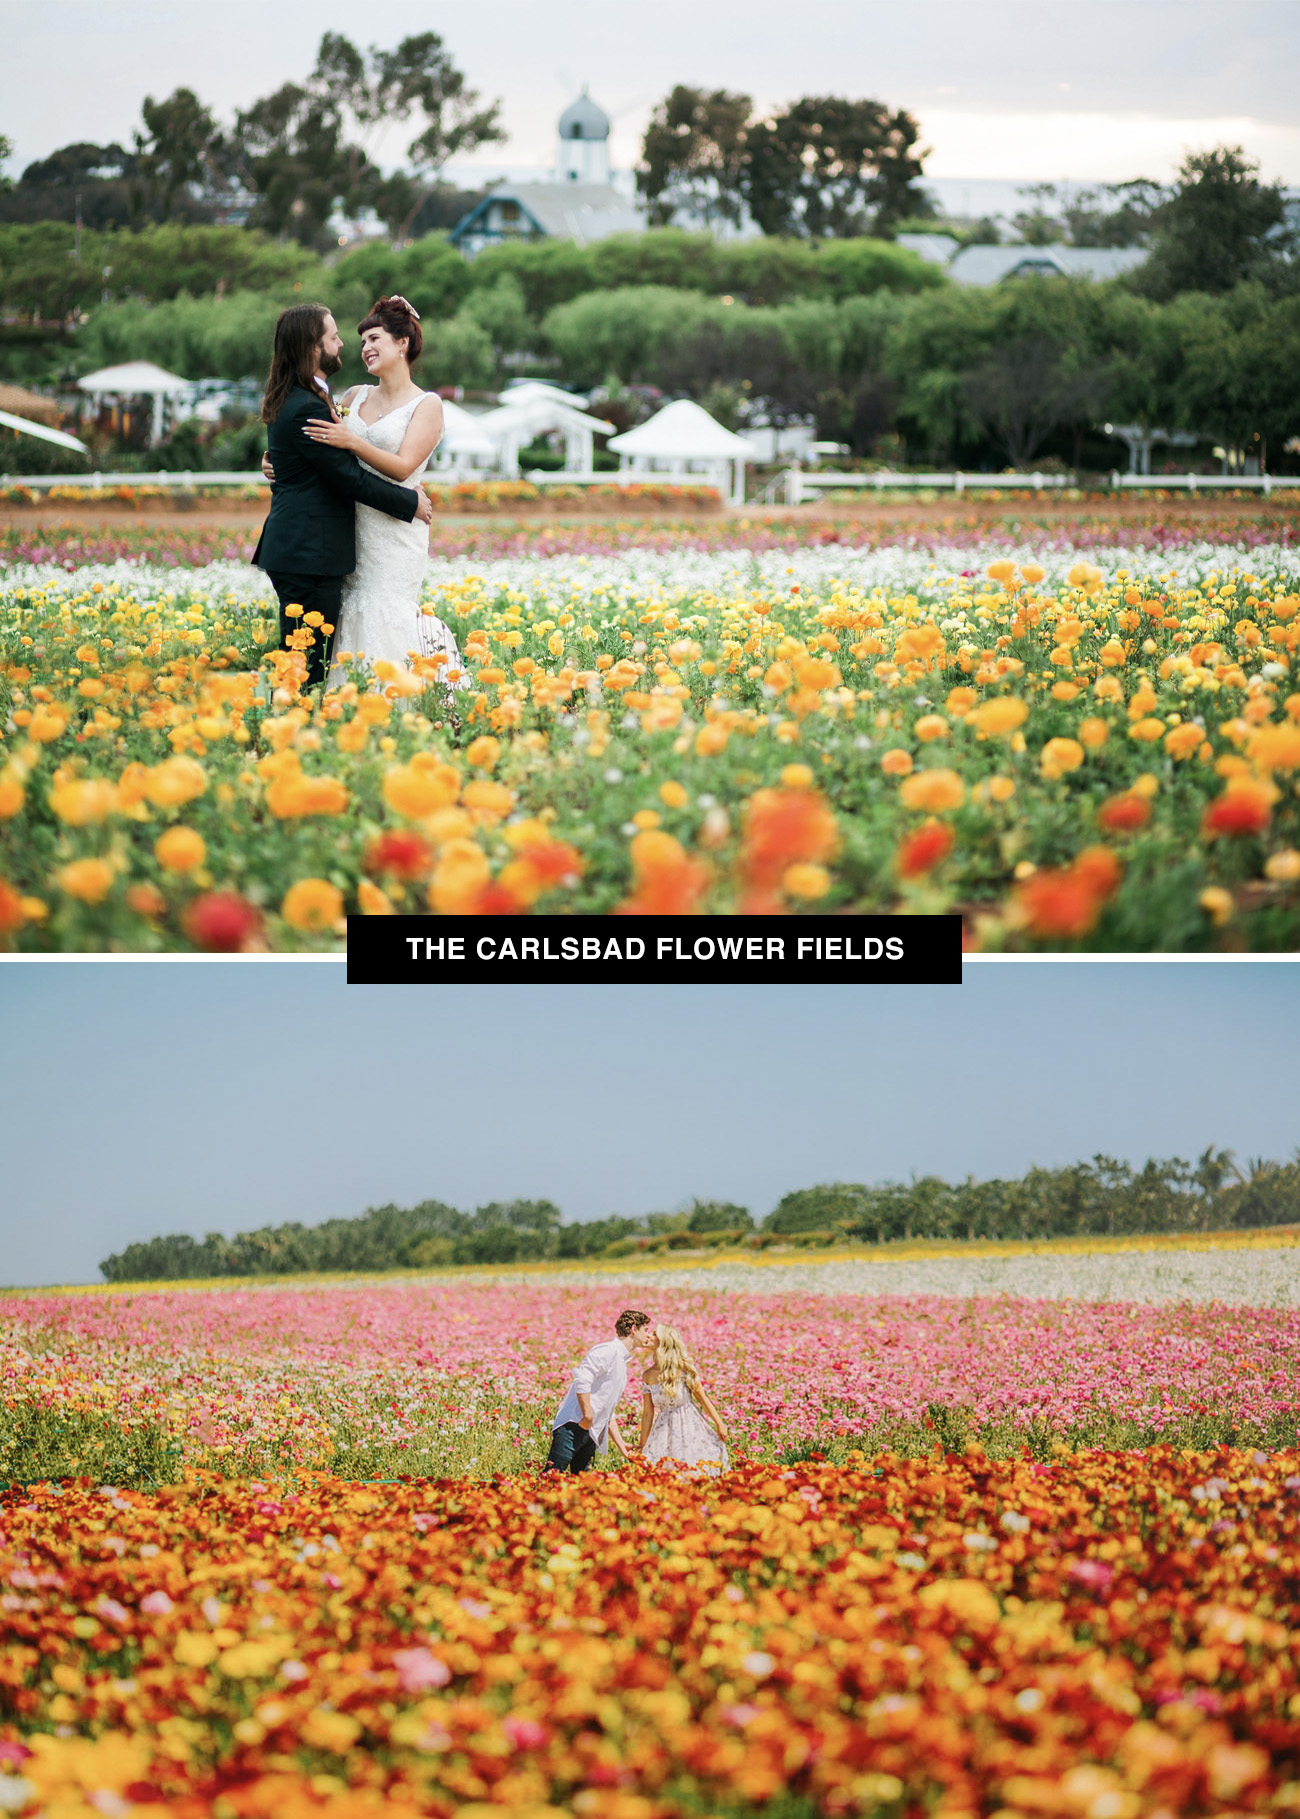  Carlsbad Ranunculus Flower Fields as a wedding venue - a place to get married for flower lovers